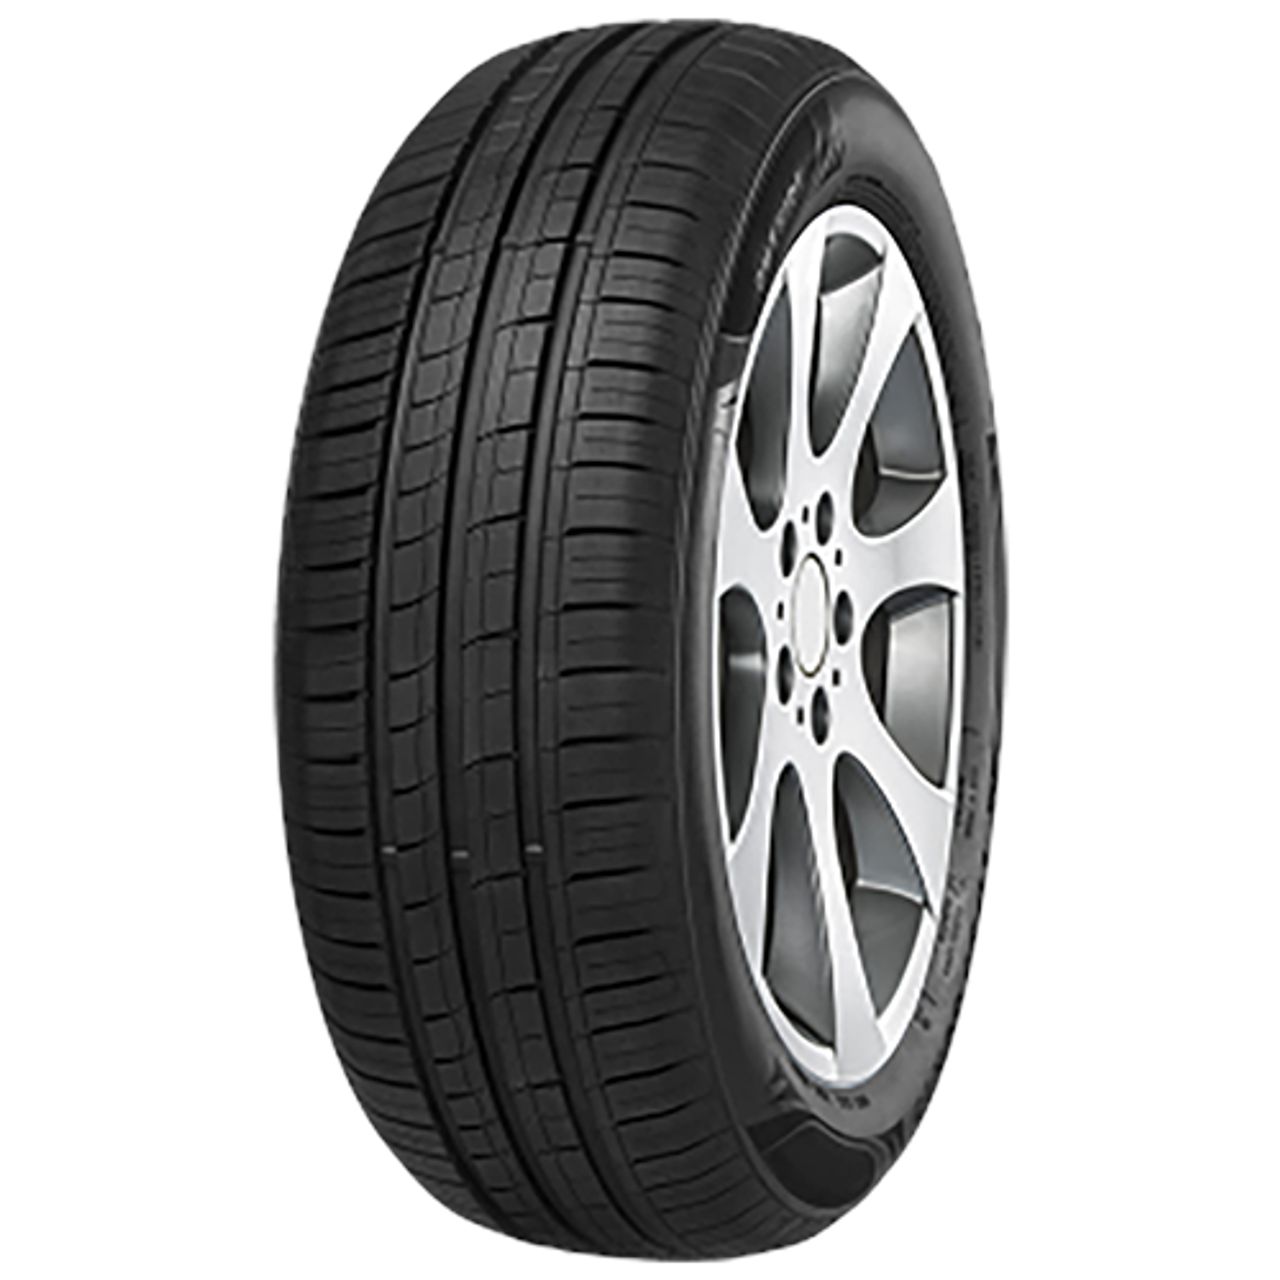 IMPERIAL ECODRIVER 4 145/65R15 72T